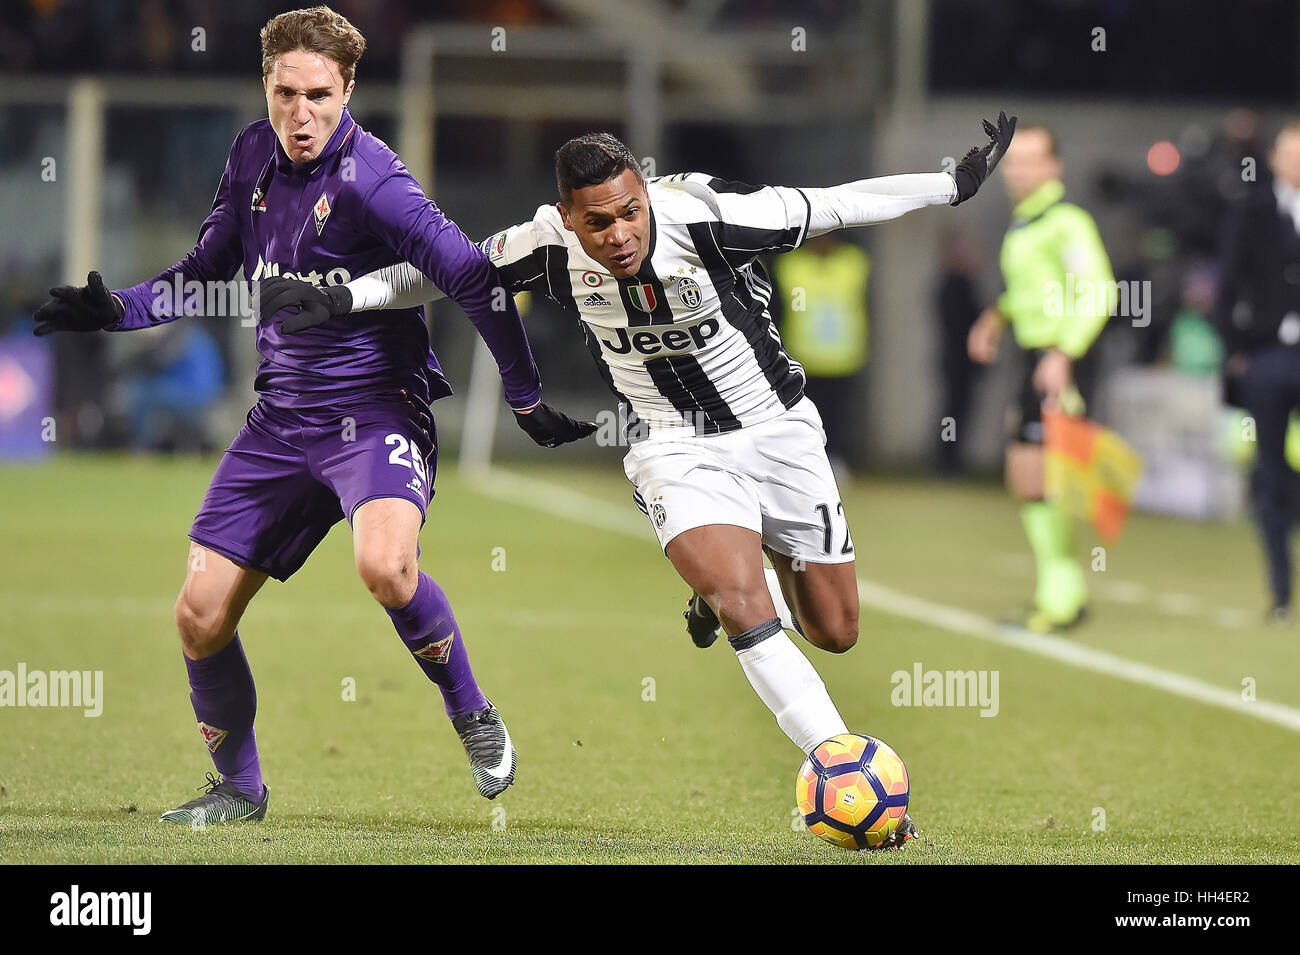 Florence, Italy. 15th Jan, 2017. Juventus's Lobo Silva Alex Sandro (R) challenged by A.c.f. Fiorentina's Federico Chiesai (L) during the Italian Serie A soccer match between A.c.f. Fiorentina and Juventus at Artemio Franchi Stadium. Credit: Giacomo Morini/Pacific Press/Alamy Live News Stock Photo